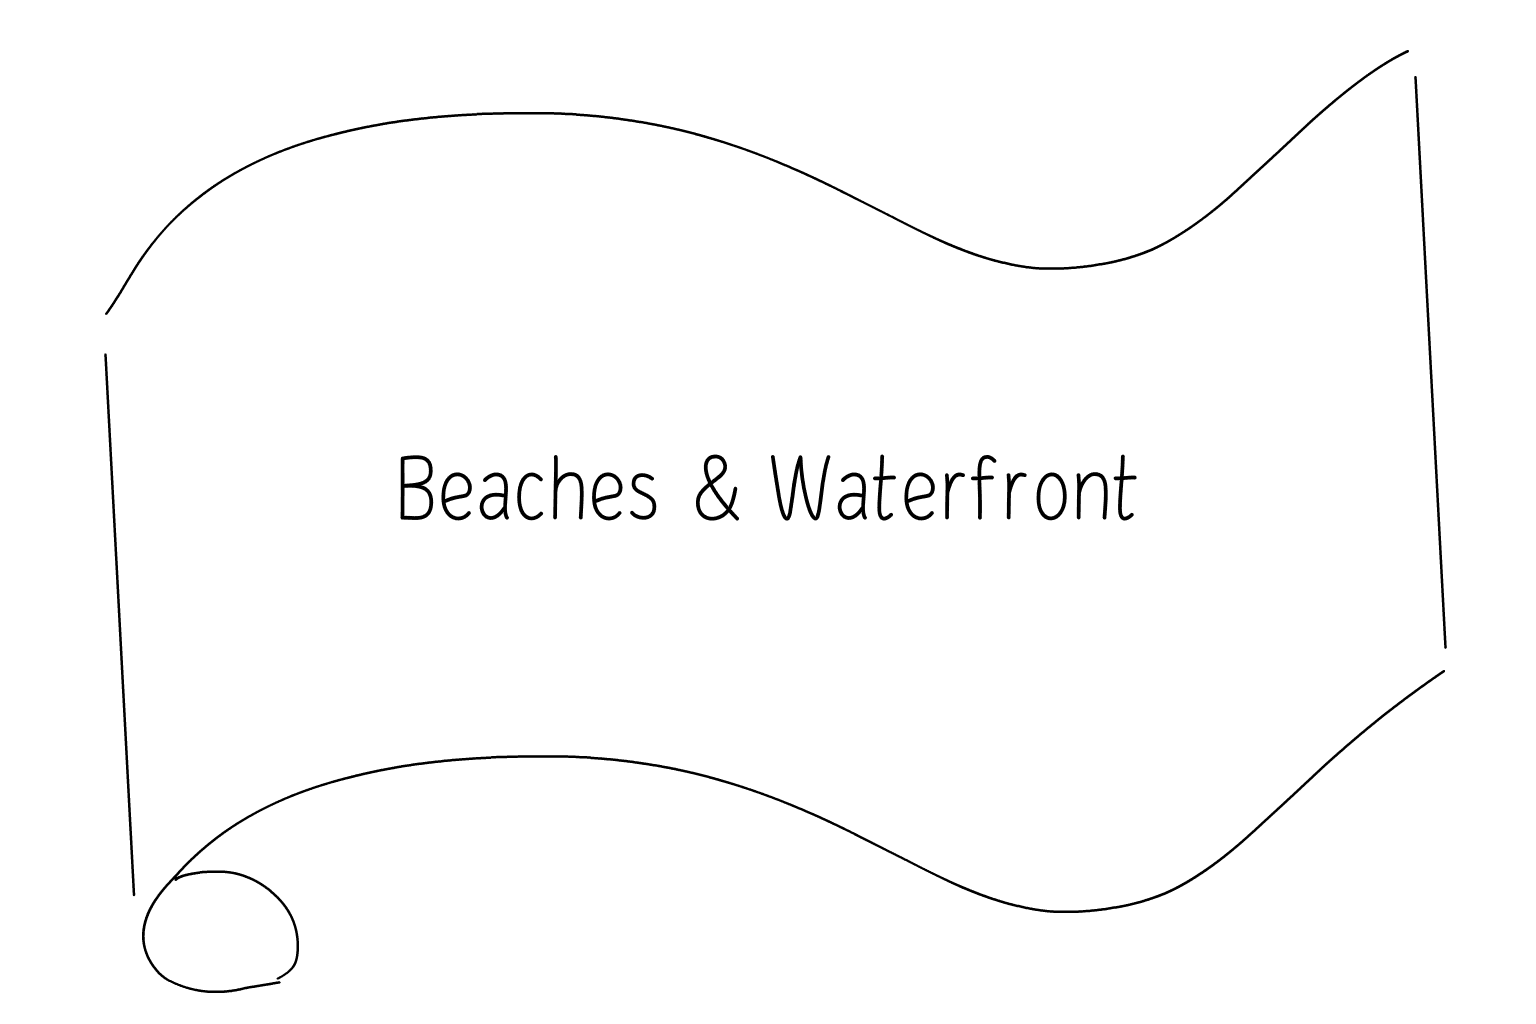 Illustration of Beaches & Waterfront